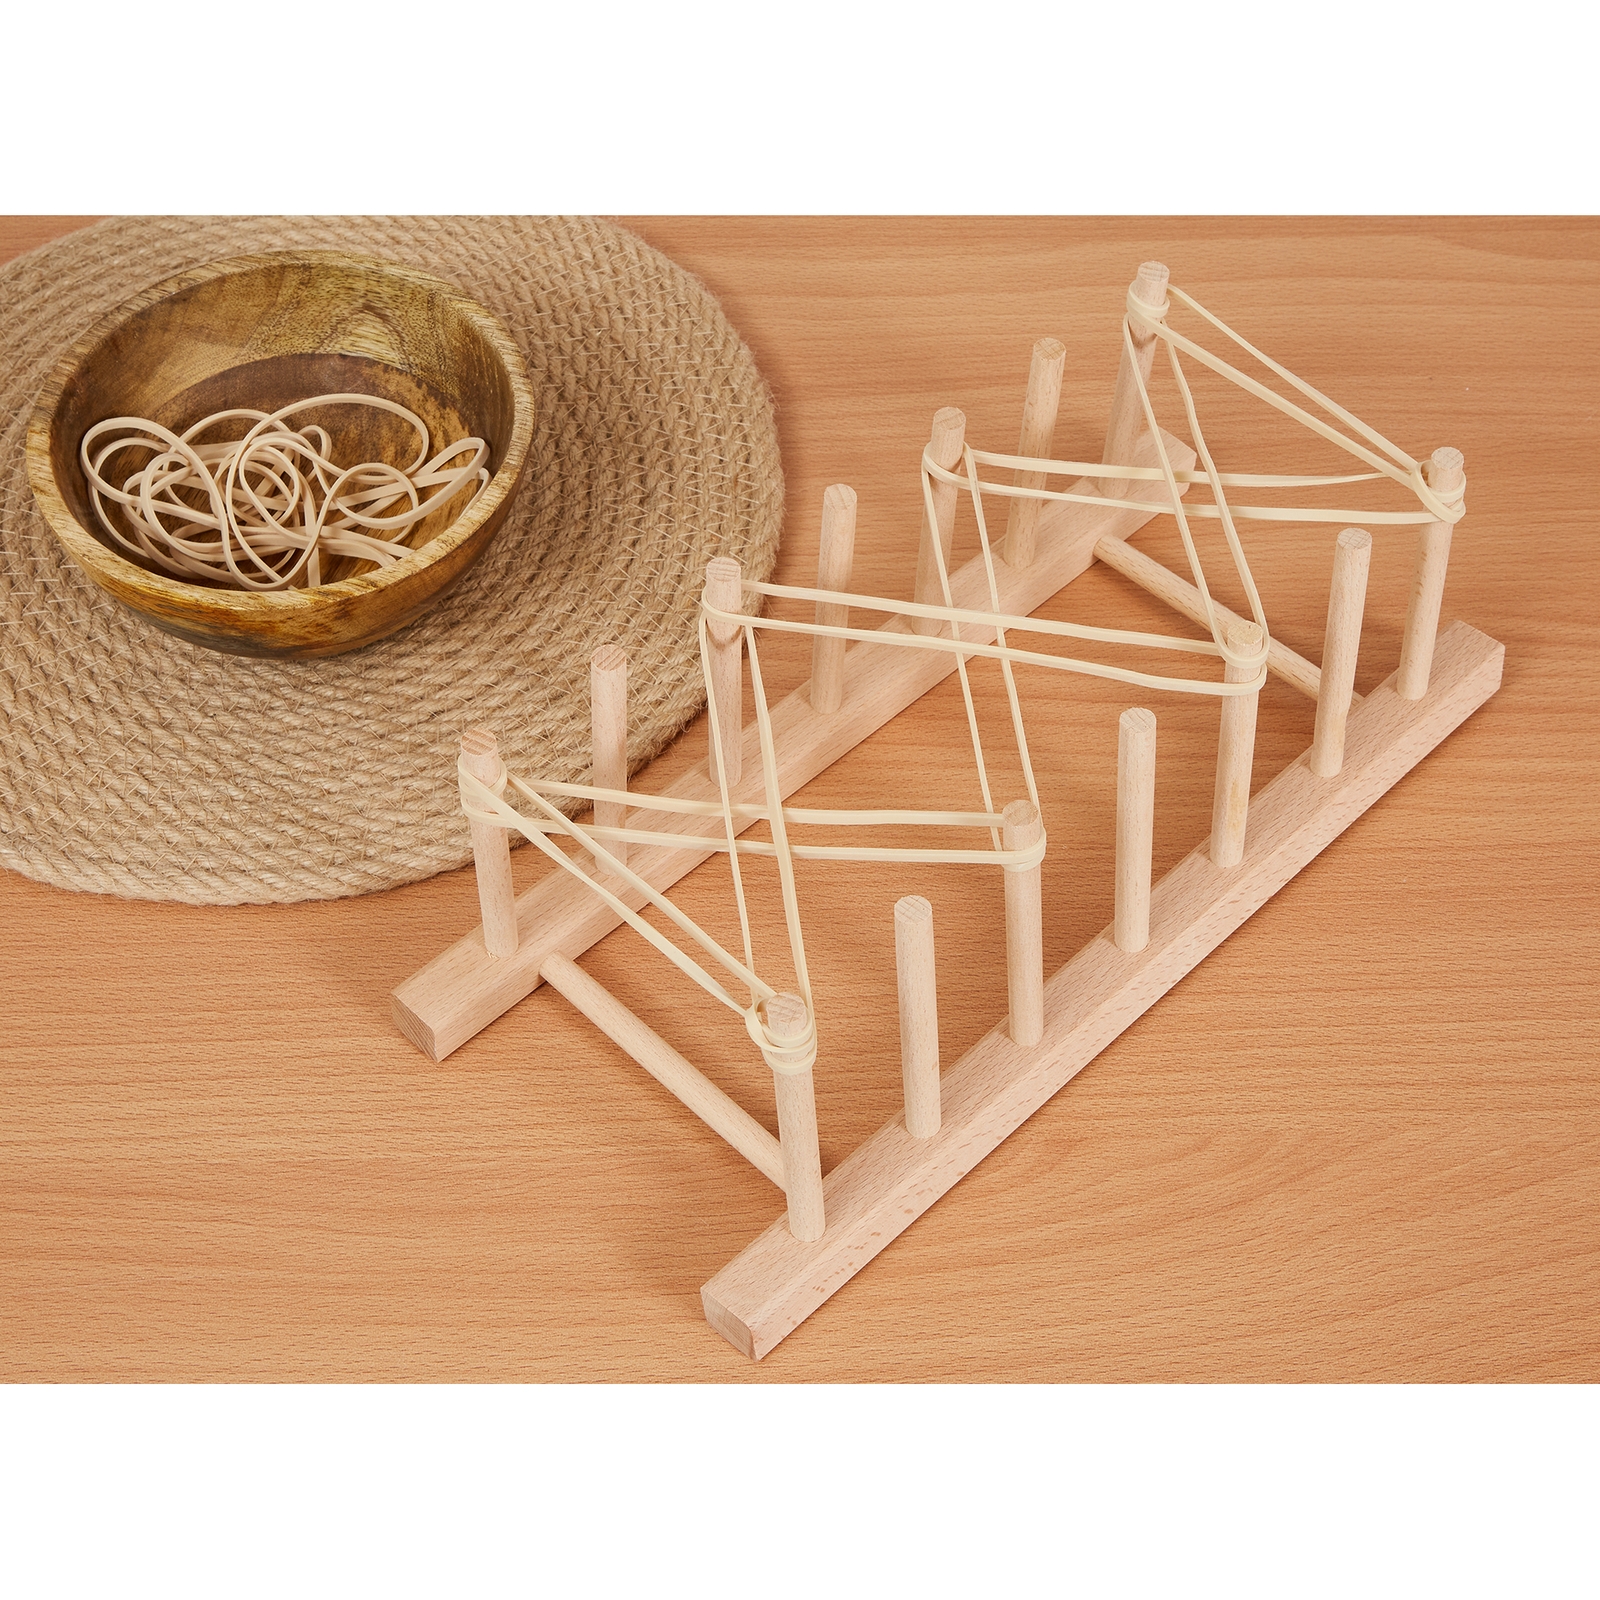 Wooden Threading Stand from Hope Education